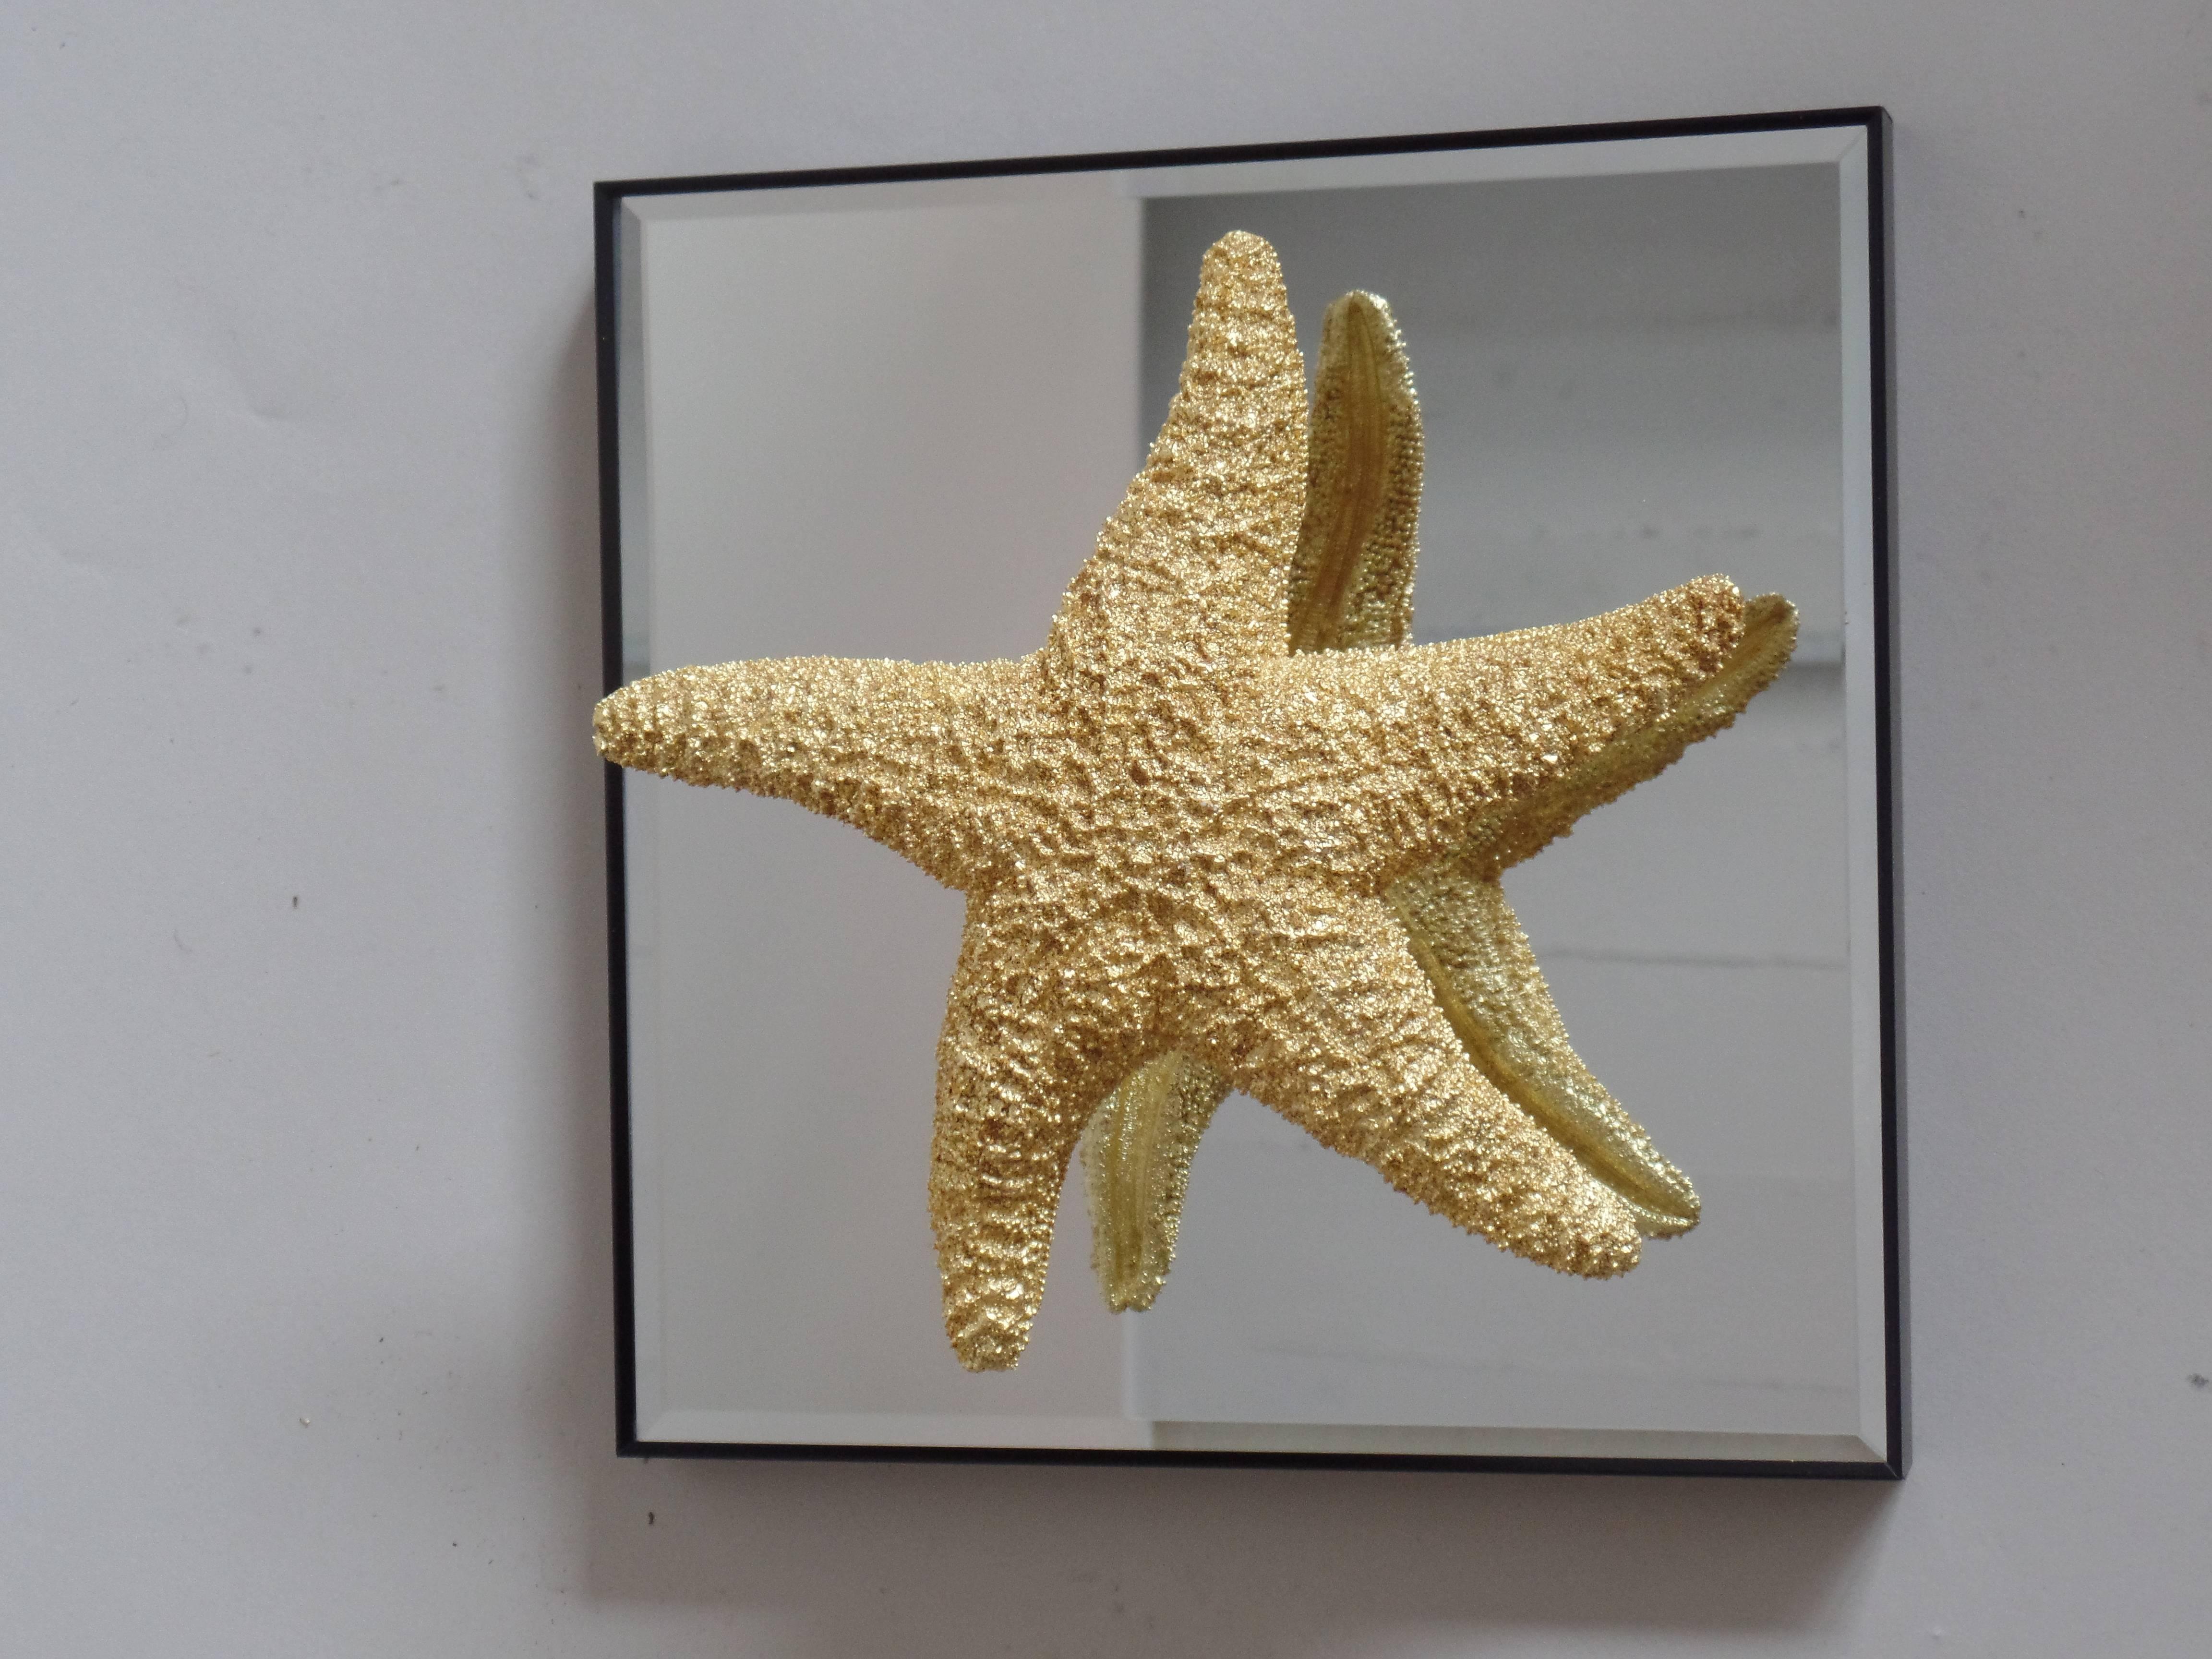 Stunnng mirrors with applied, suspended starfish, each gilt in 23-carat gold with inspiration from French Surrealist Designers, Jean-Charles Moreux and Bolette Natanson. Each starfish is natural and slightly different from each other. They rest